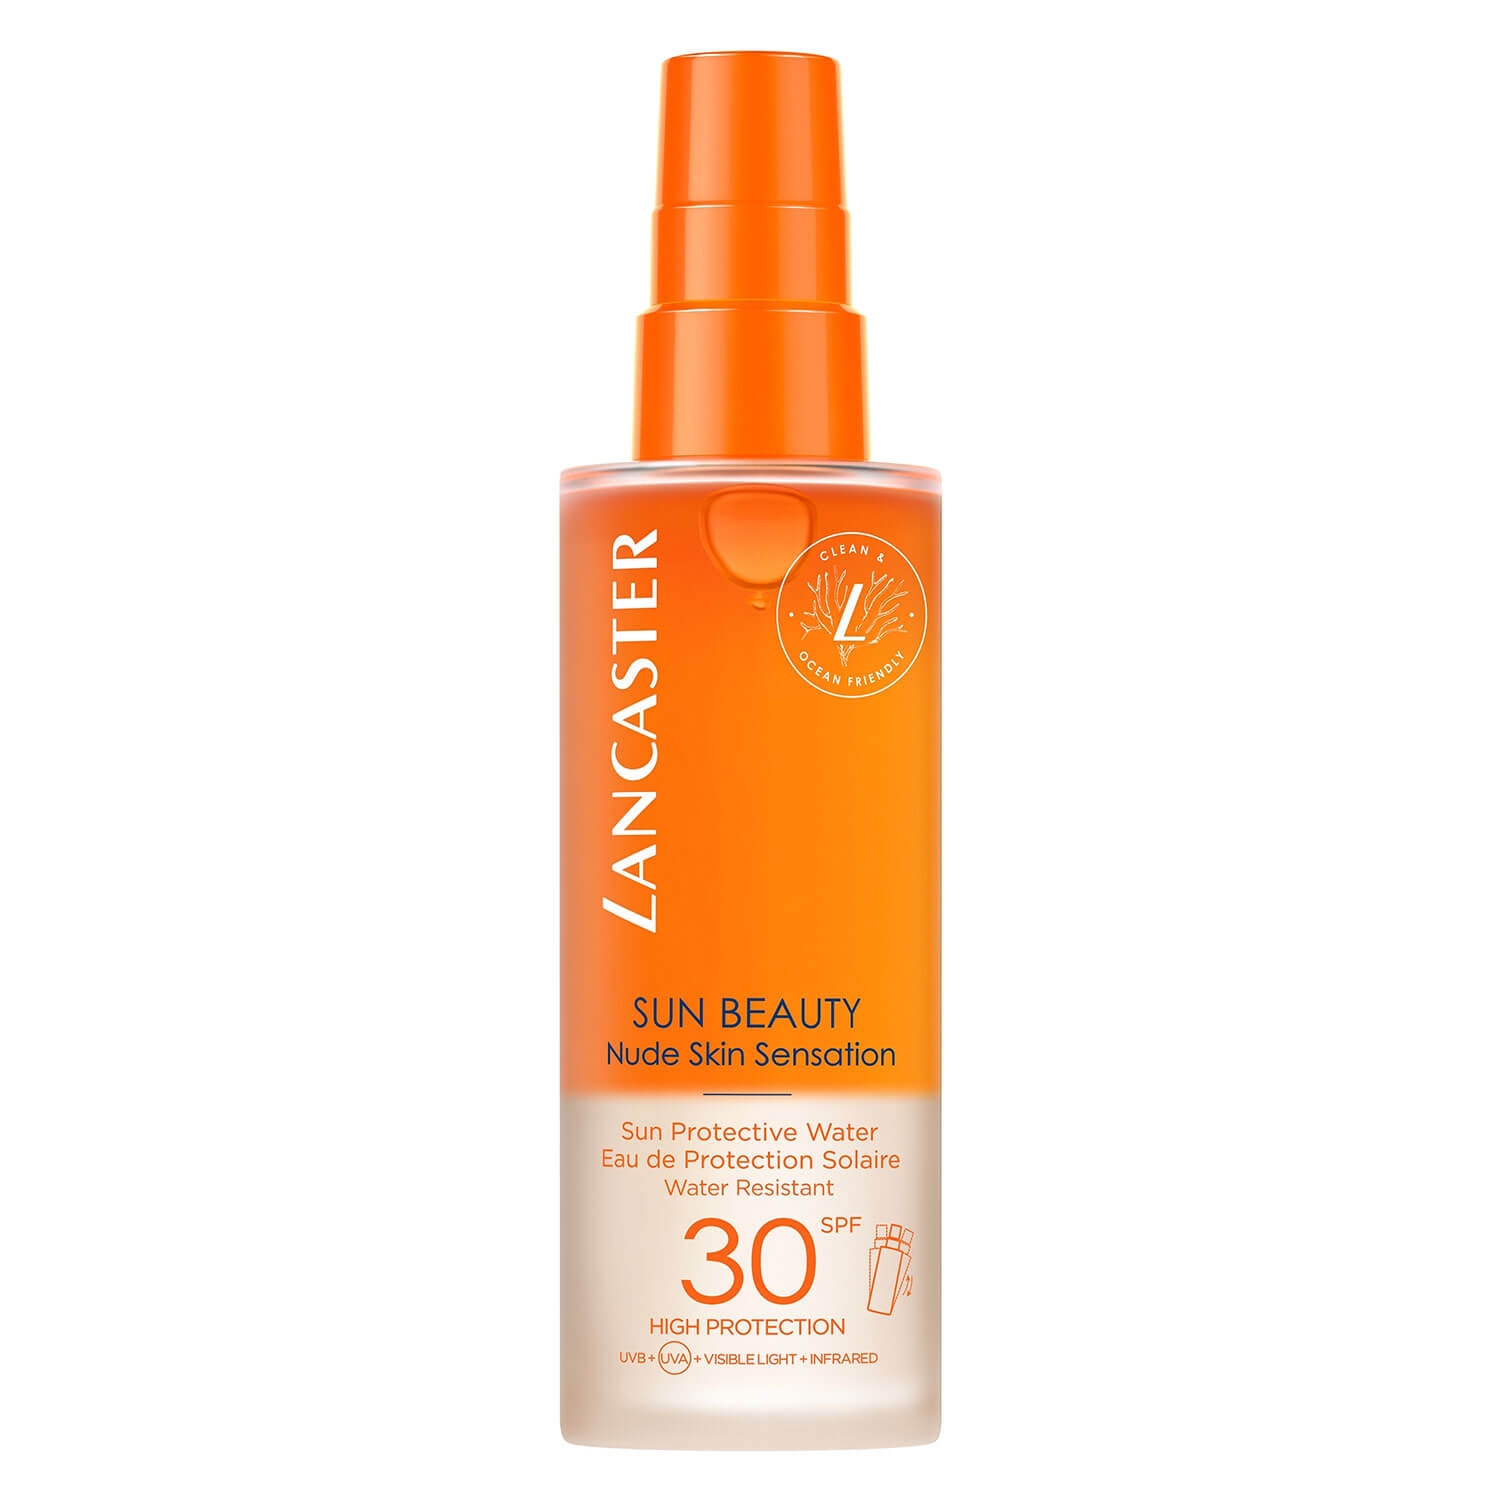 Product image from Sun Beauty - Nude Skin Sensation Sun Protection Water SPF30